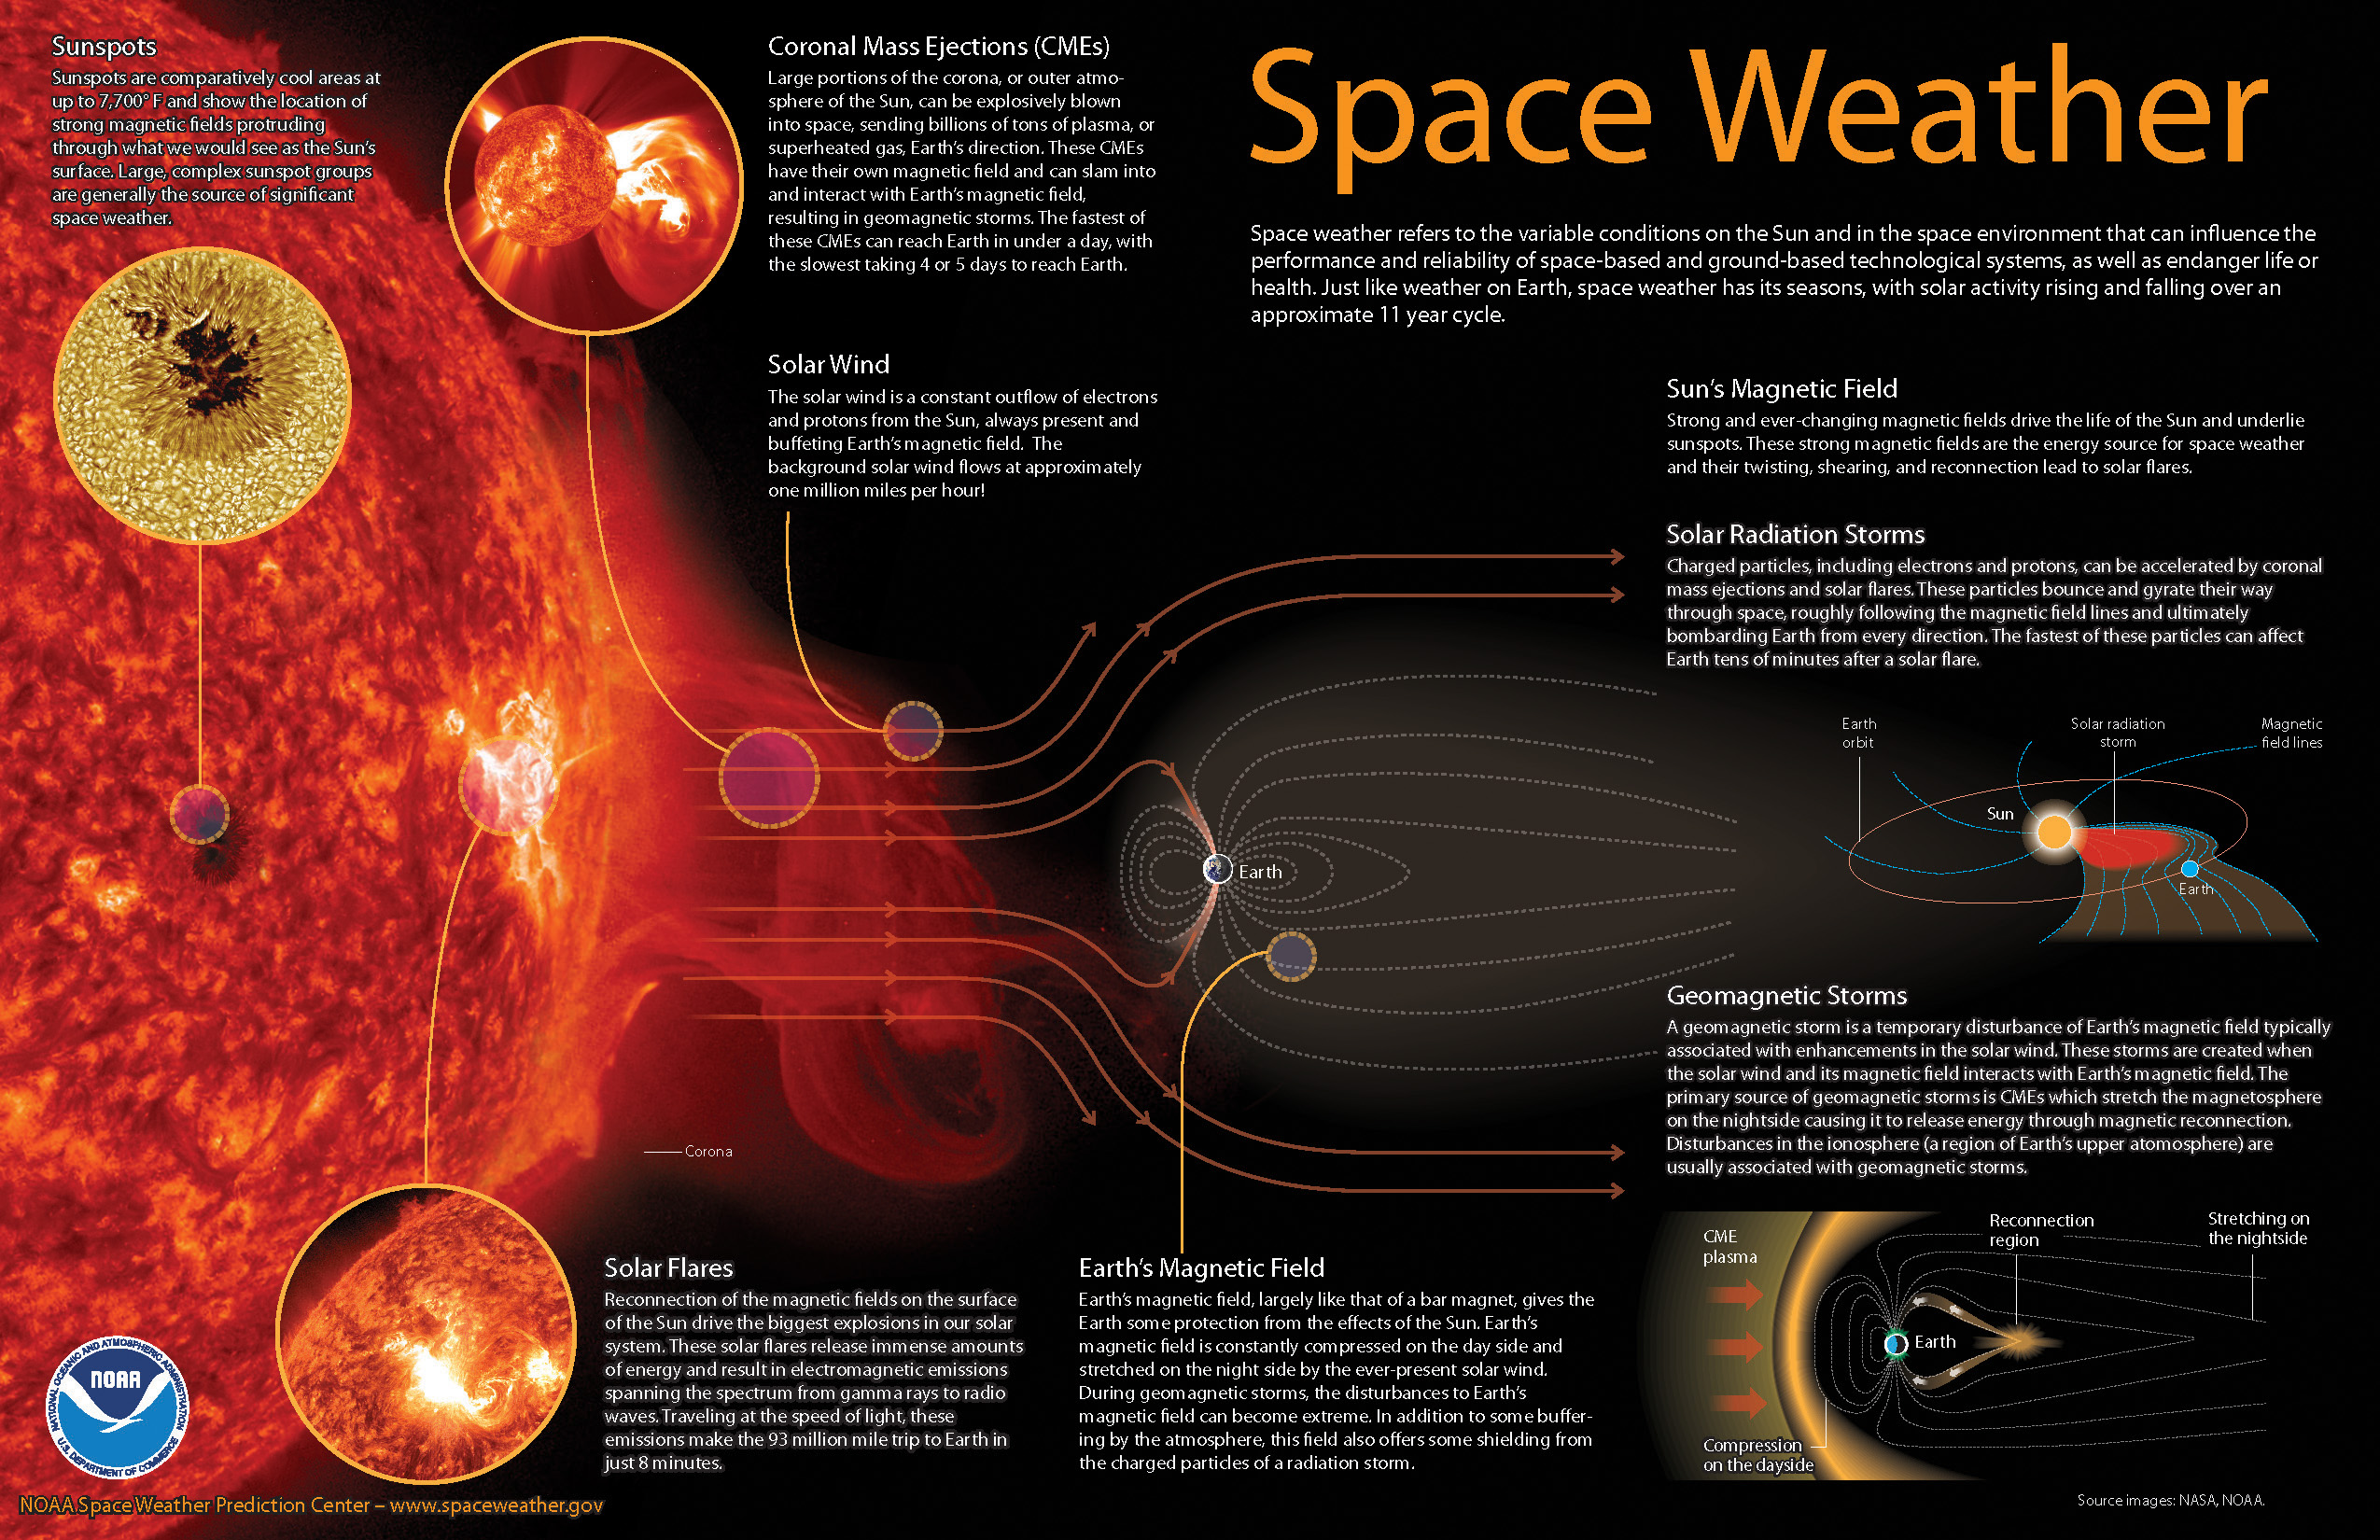 NOAA space weather infographic. For more space weather infographics and videos, please visit http://www.swpc.noaa.gov/content/education-and-outreach. 